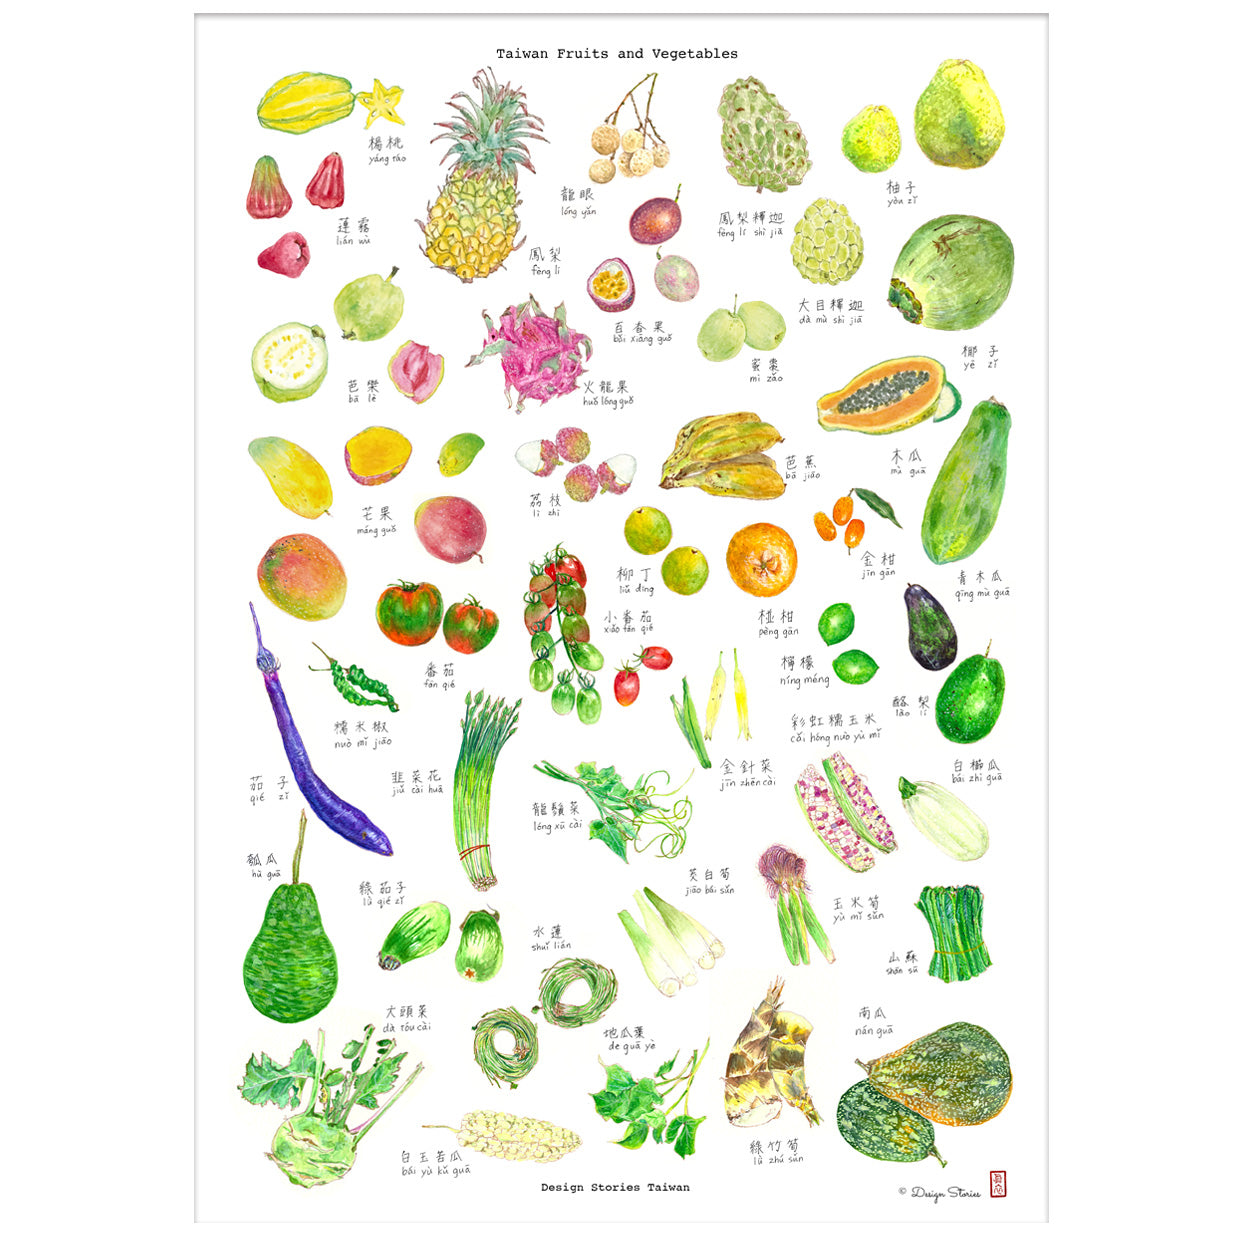 Art Print "Taiwan Fruits and Vegetables" A3size(unframed)